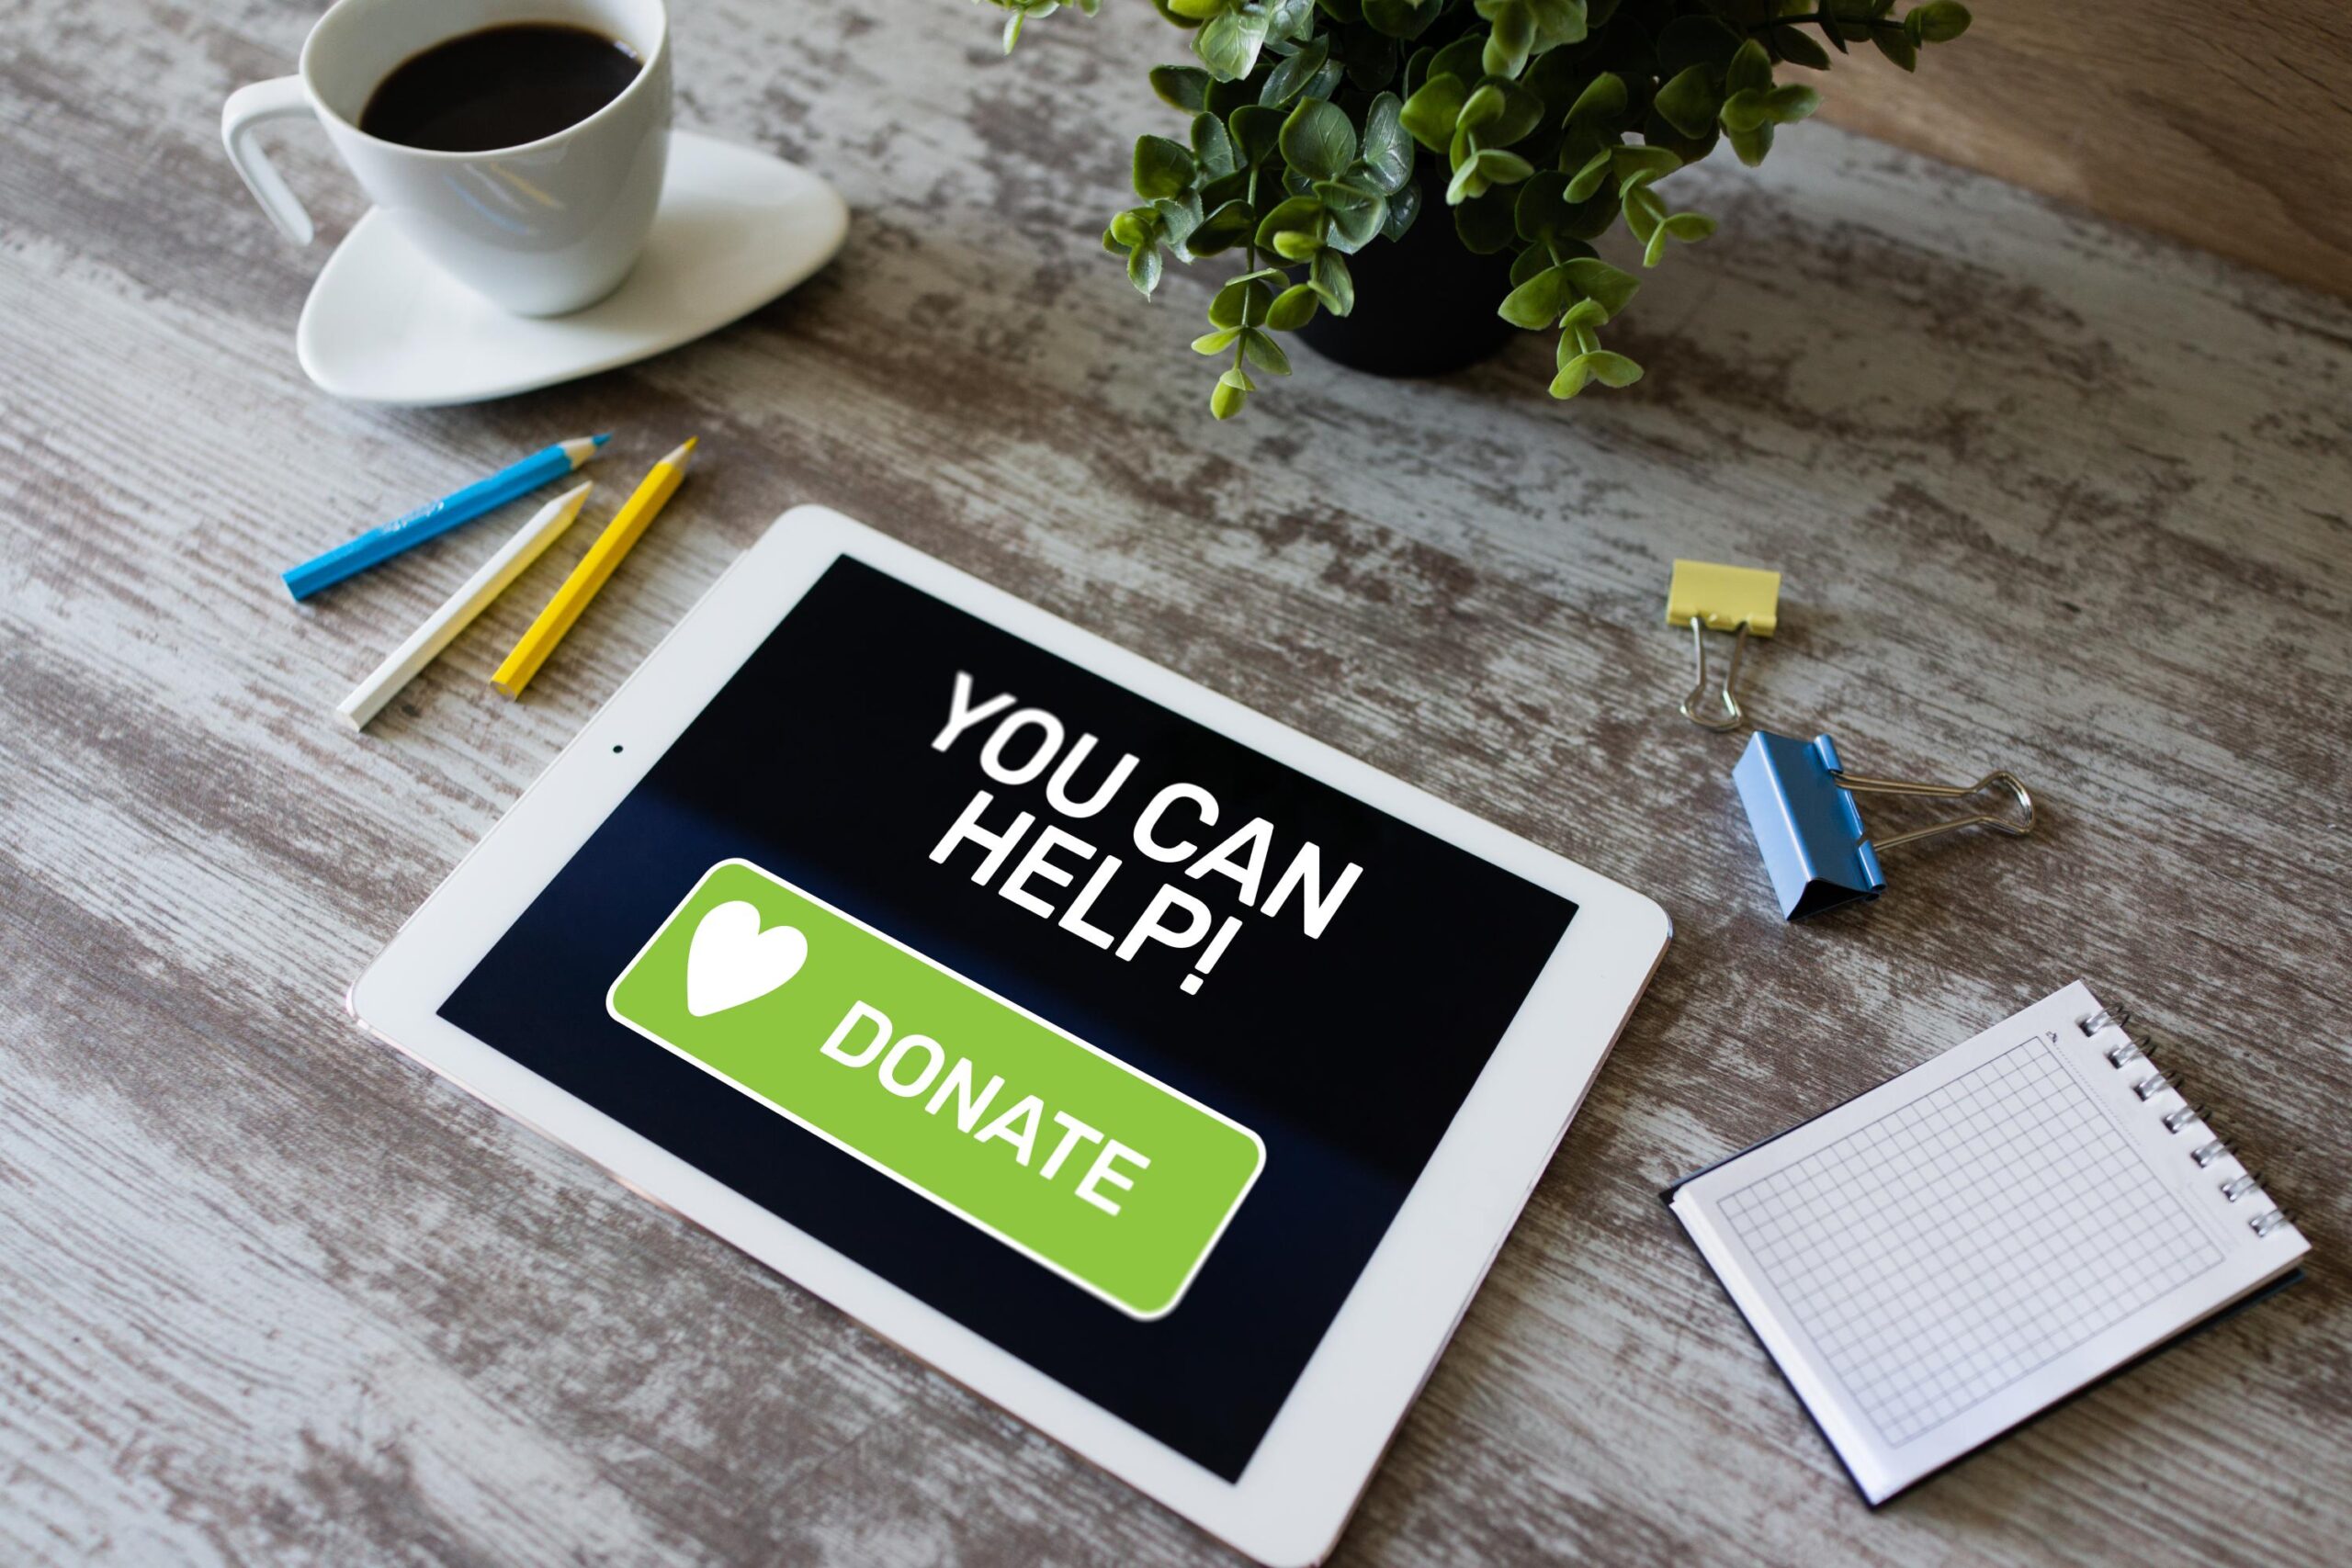 A tablet on a desk displays a "You Can Help!" Donate button. Nearby are a cup of coffee, a small plant, colored pencils, and a notepad with a binder clip.